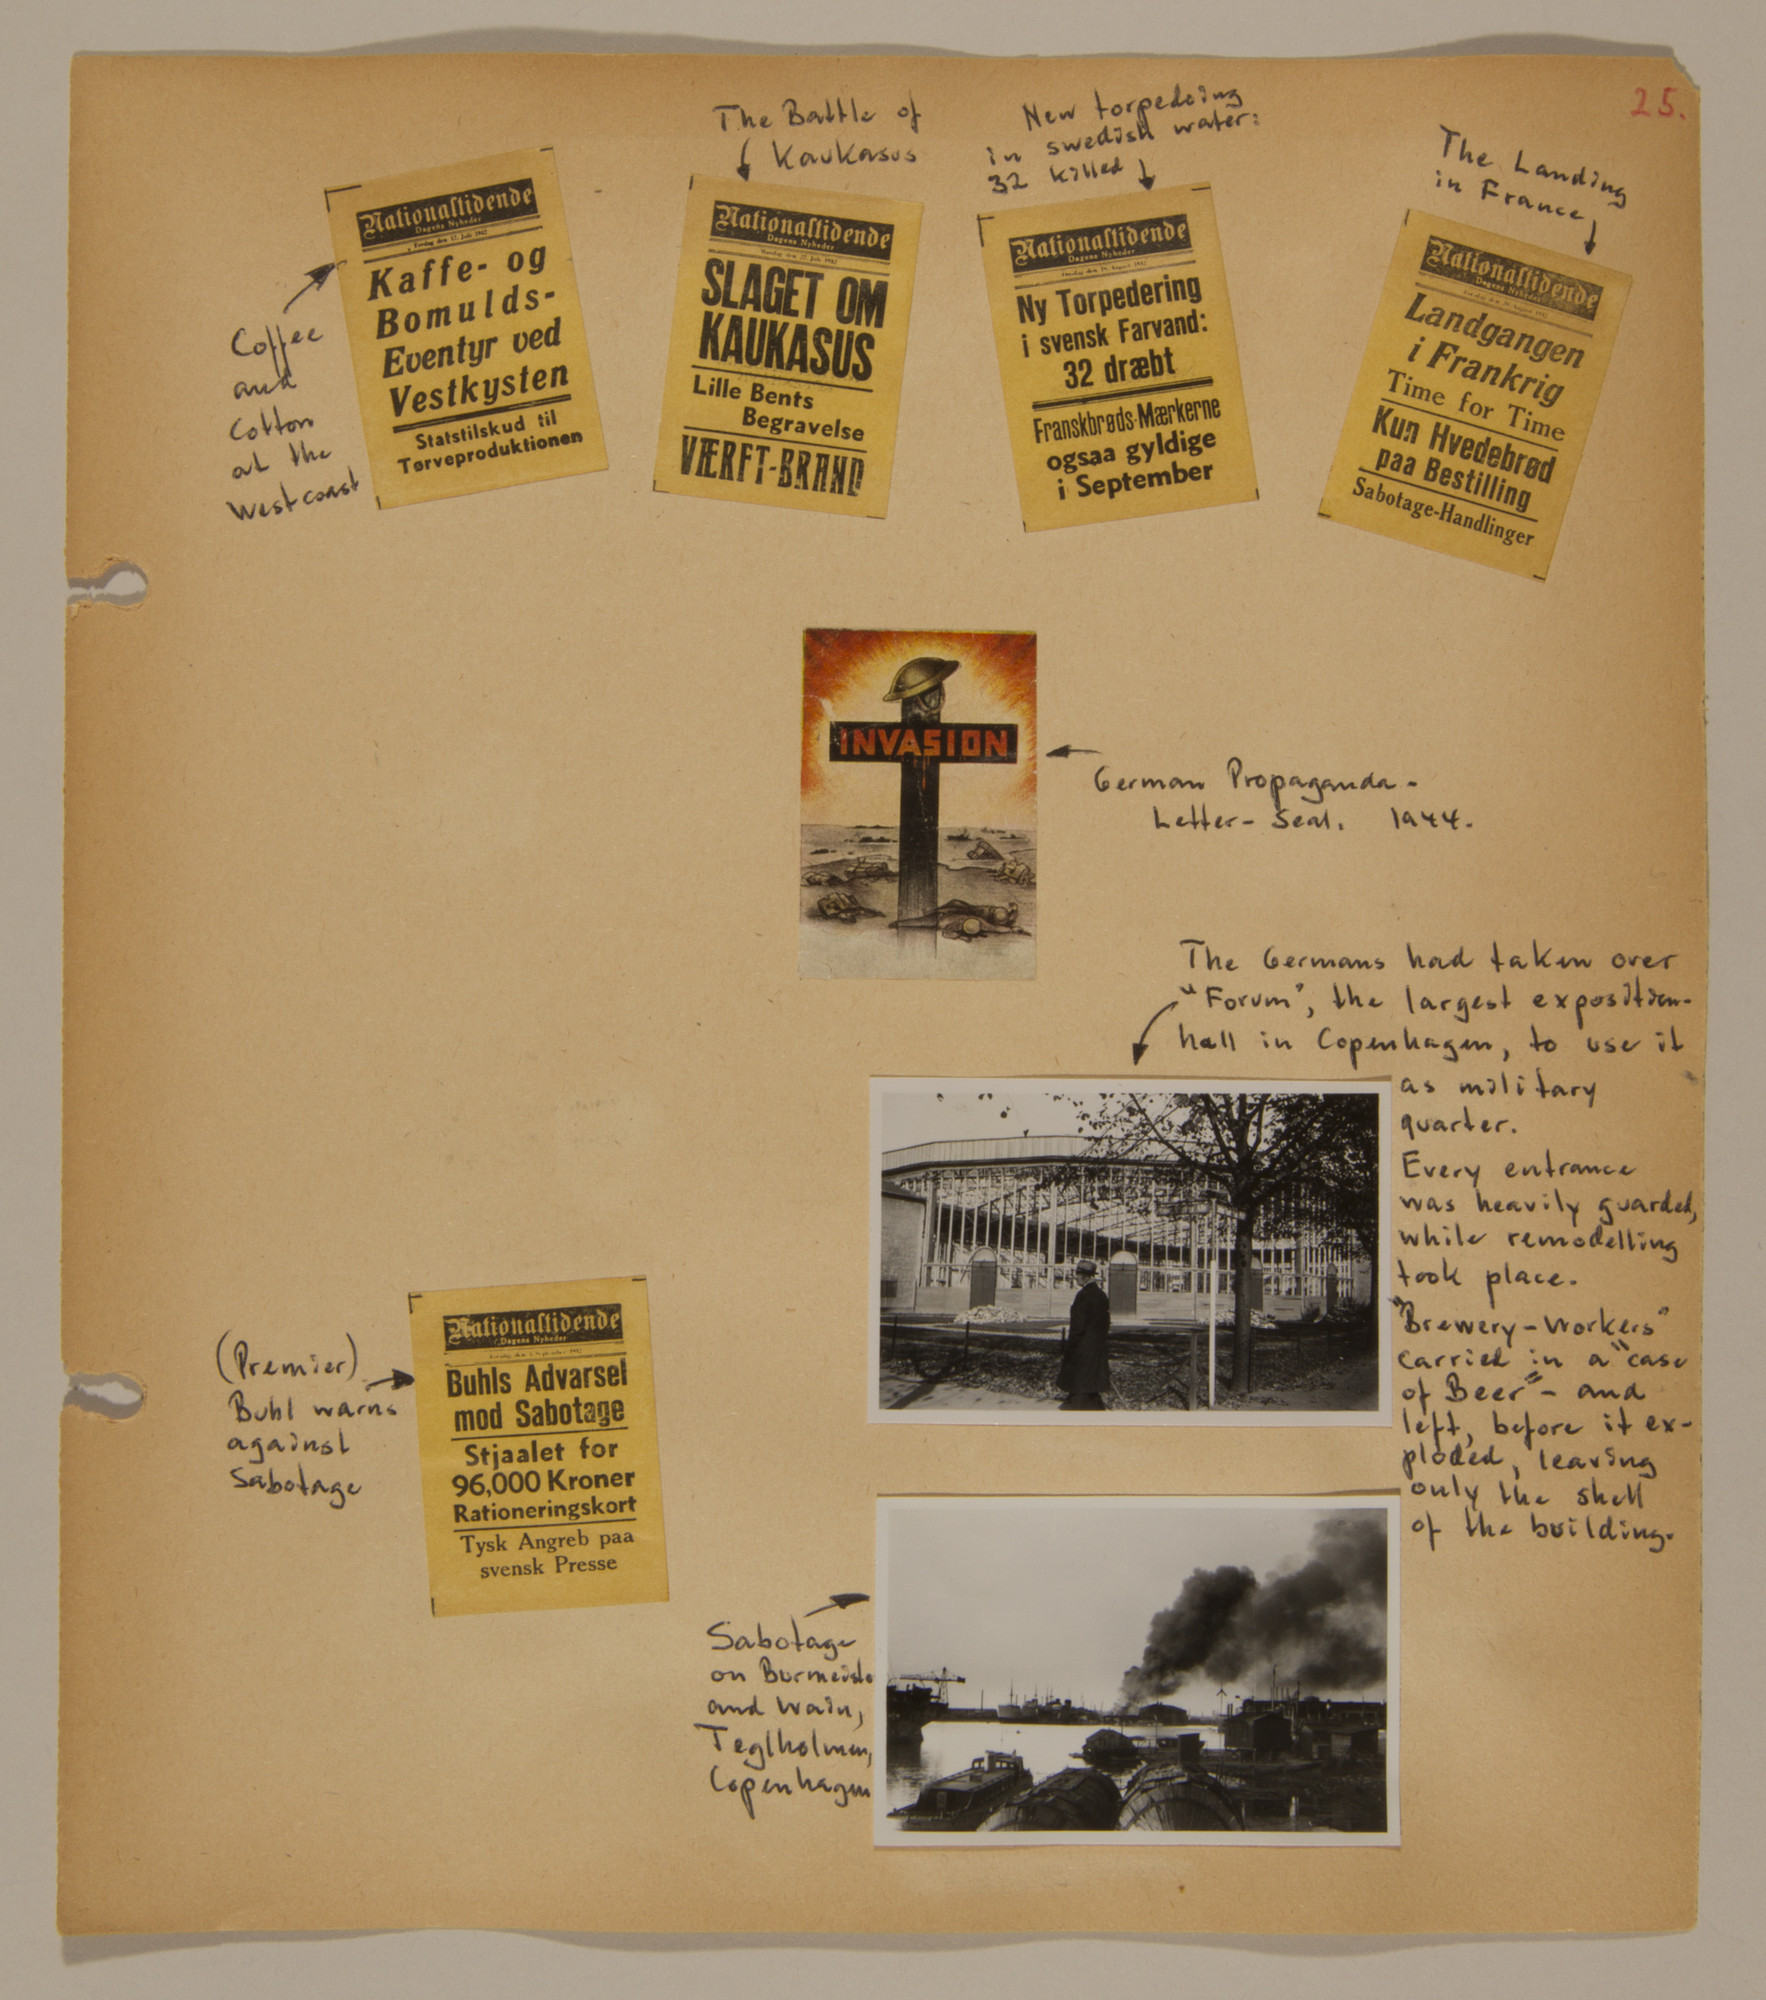 Page from volume three of a set of scrapbooks compiled by Bjorn Sibbern, a Danish policeman and resistance member, documenting the German occupation of Denmark.

This page contains newspaper headlines as well as a photos of sabotage.